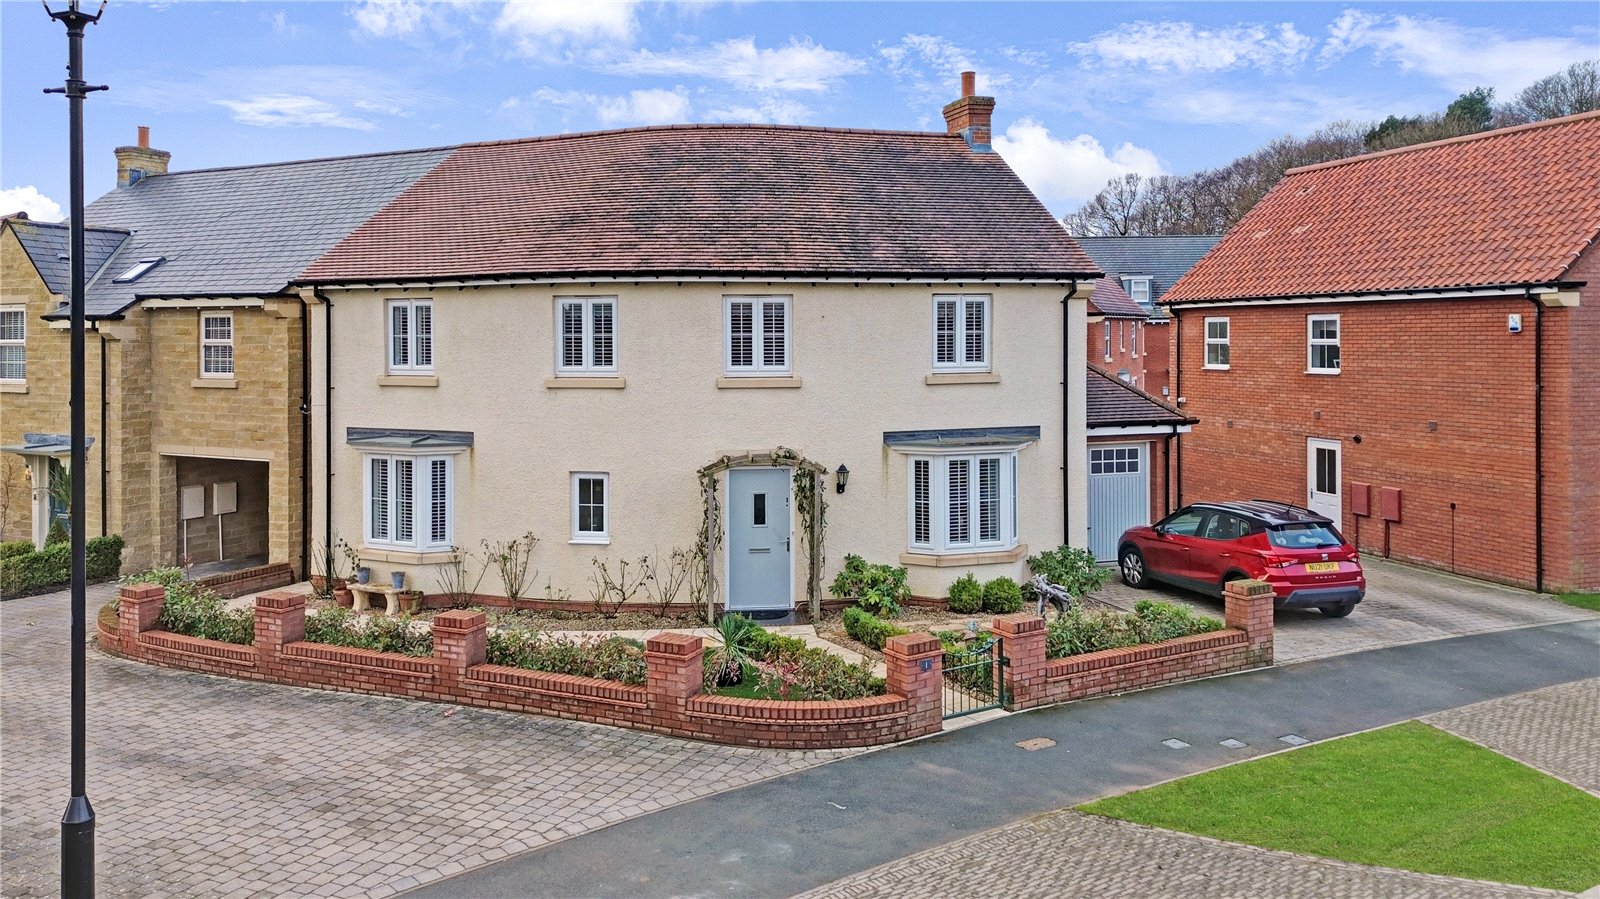 4 bed house for sale in Village Green View, Nunthorpe 1